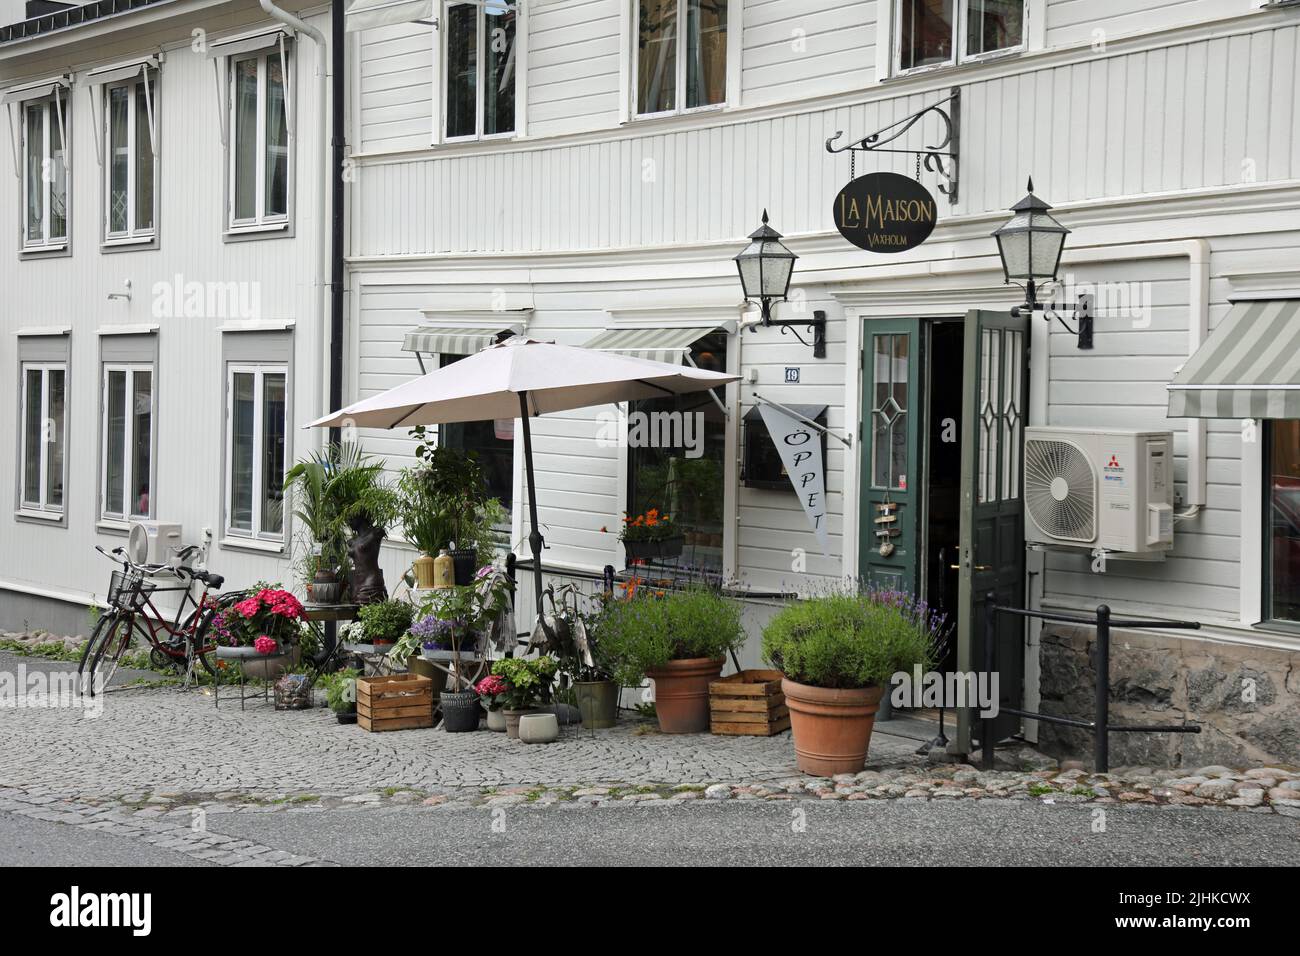 La Maison shop and restaurant at Vaxholm in Sweden Stock Photo